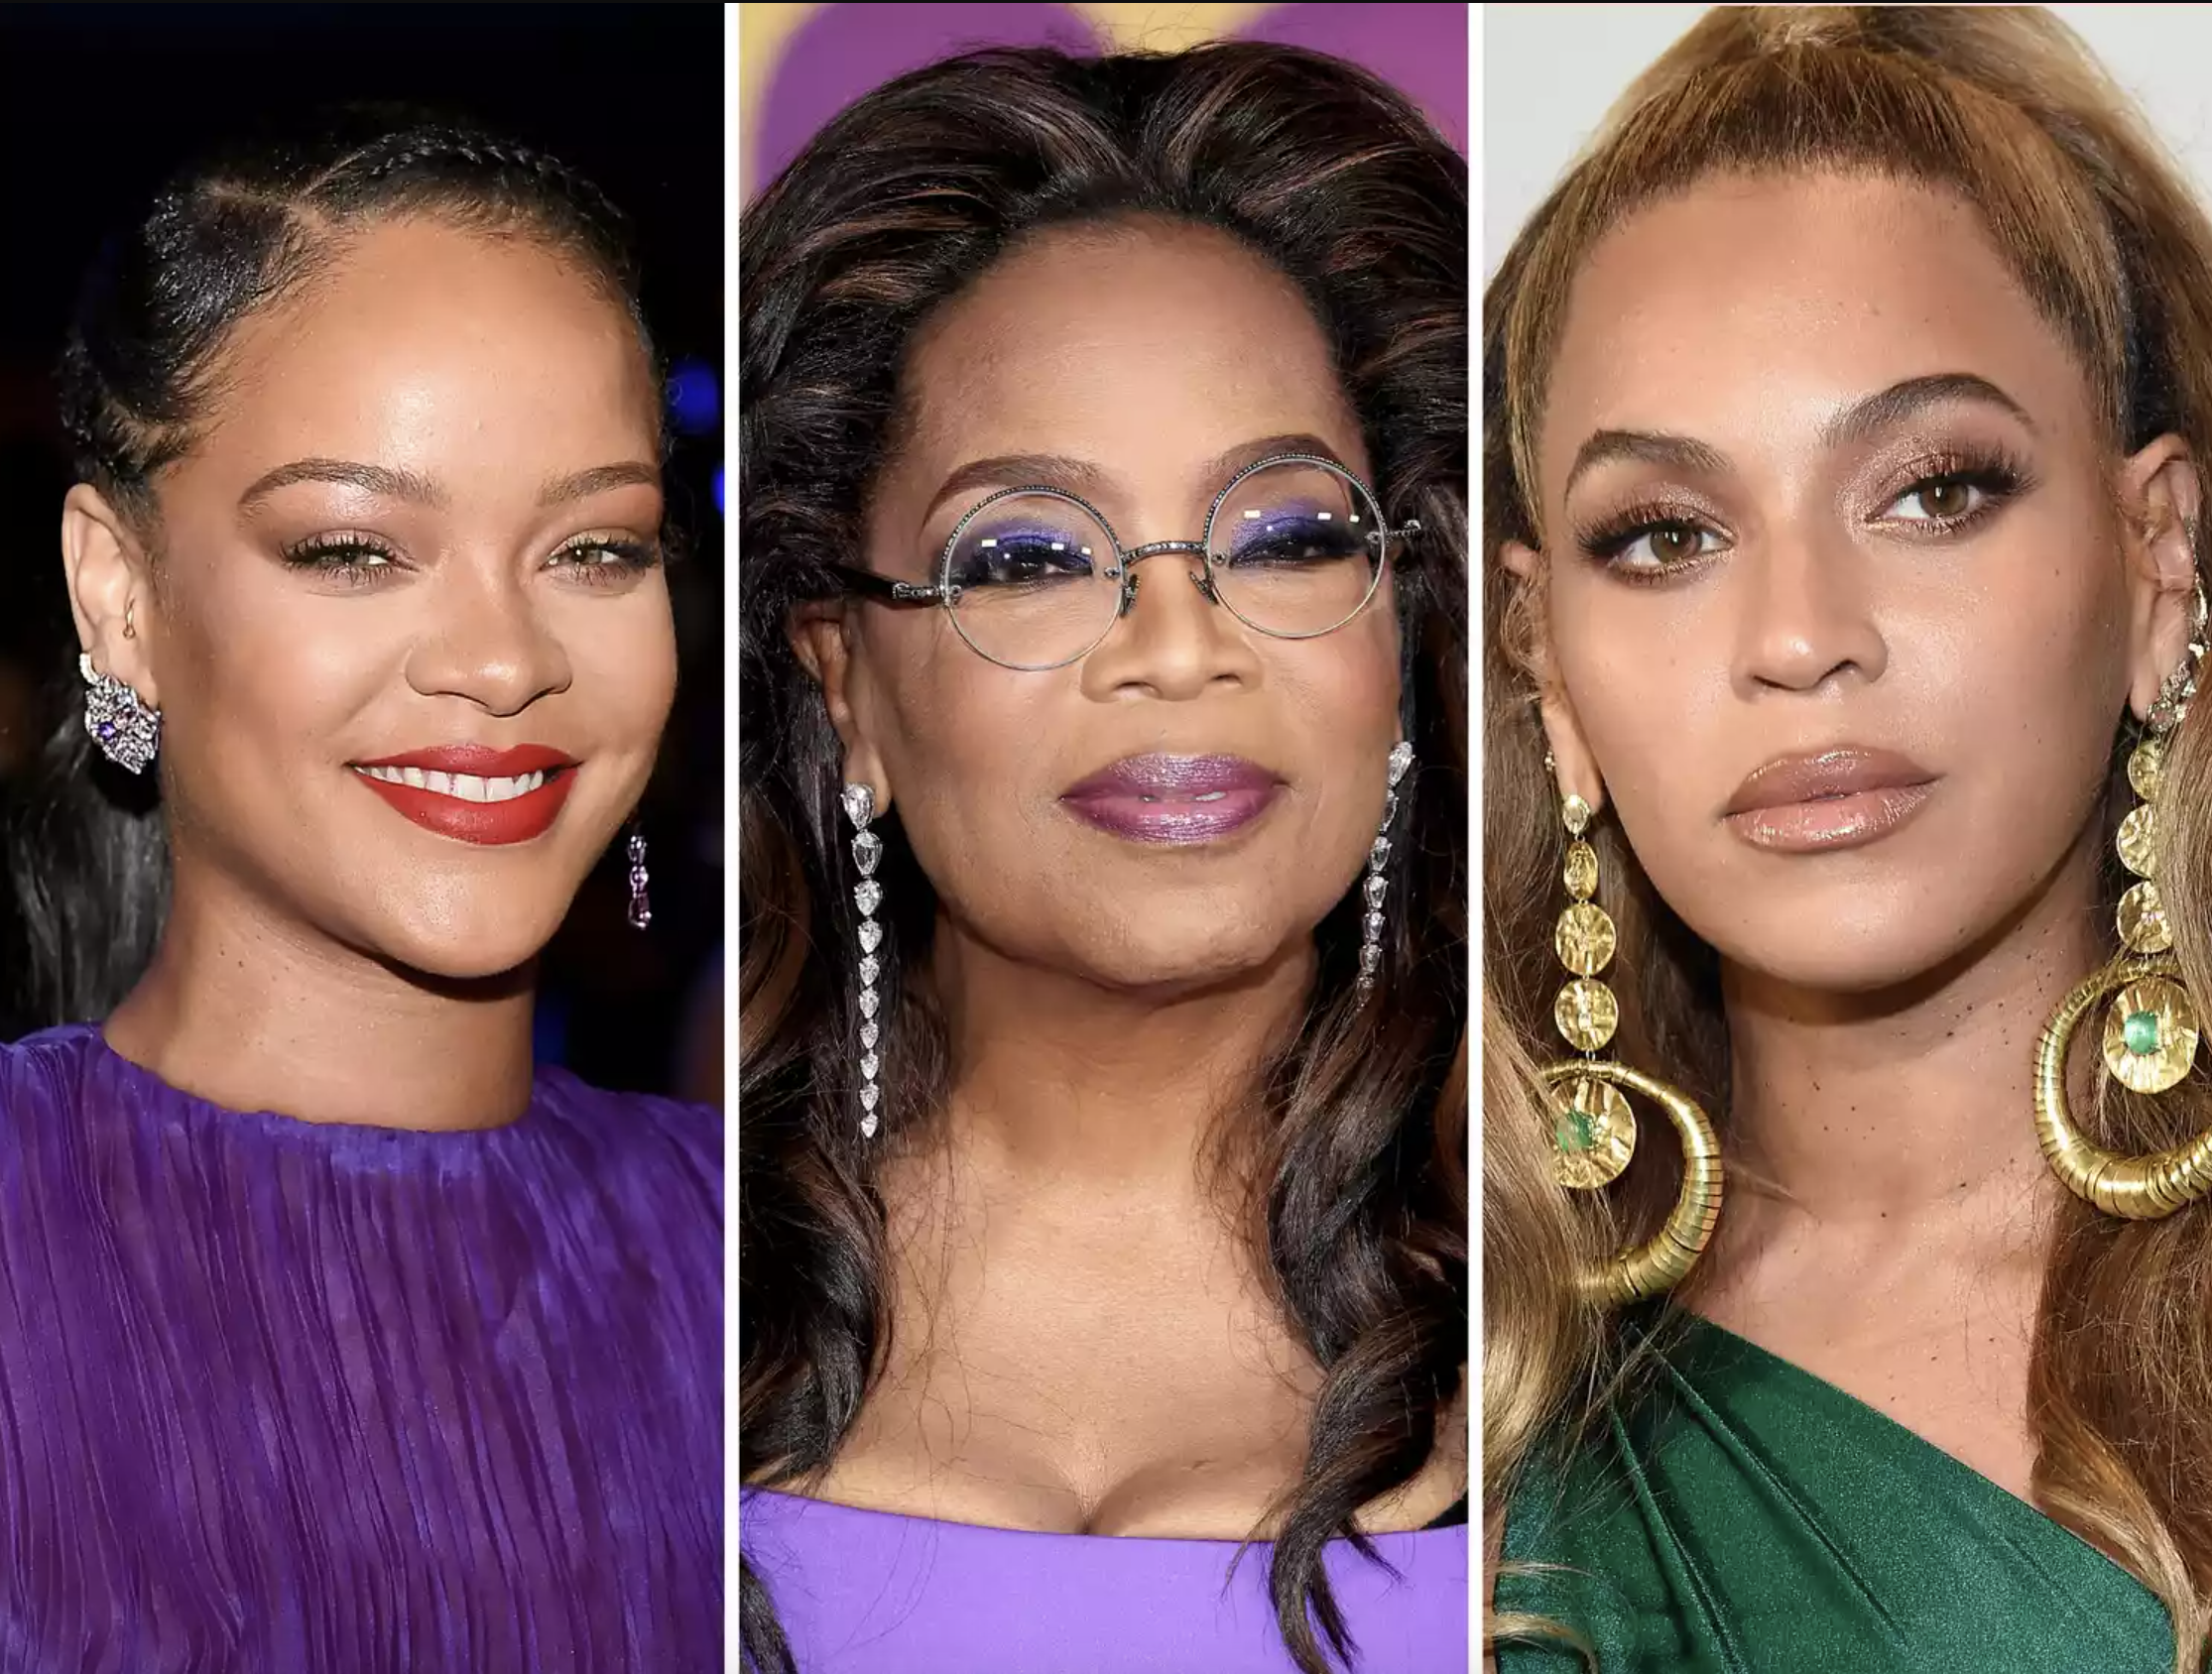 Why Oprah Winfrey Decided Against Casting Beyoncé and Rihanna in ‘The Color Purple’ Revealed.